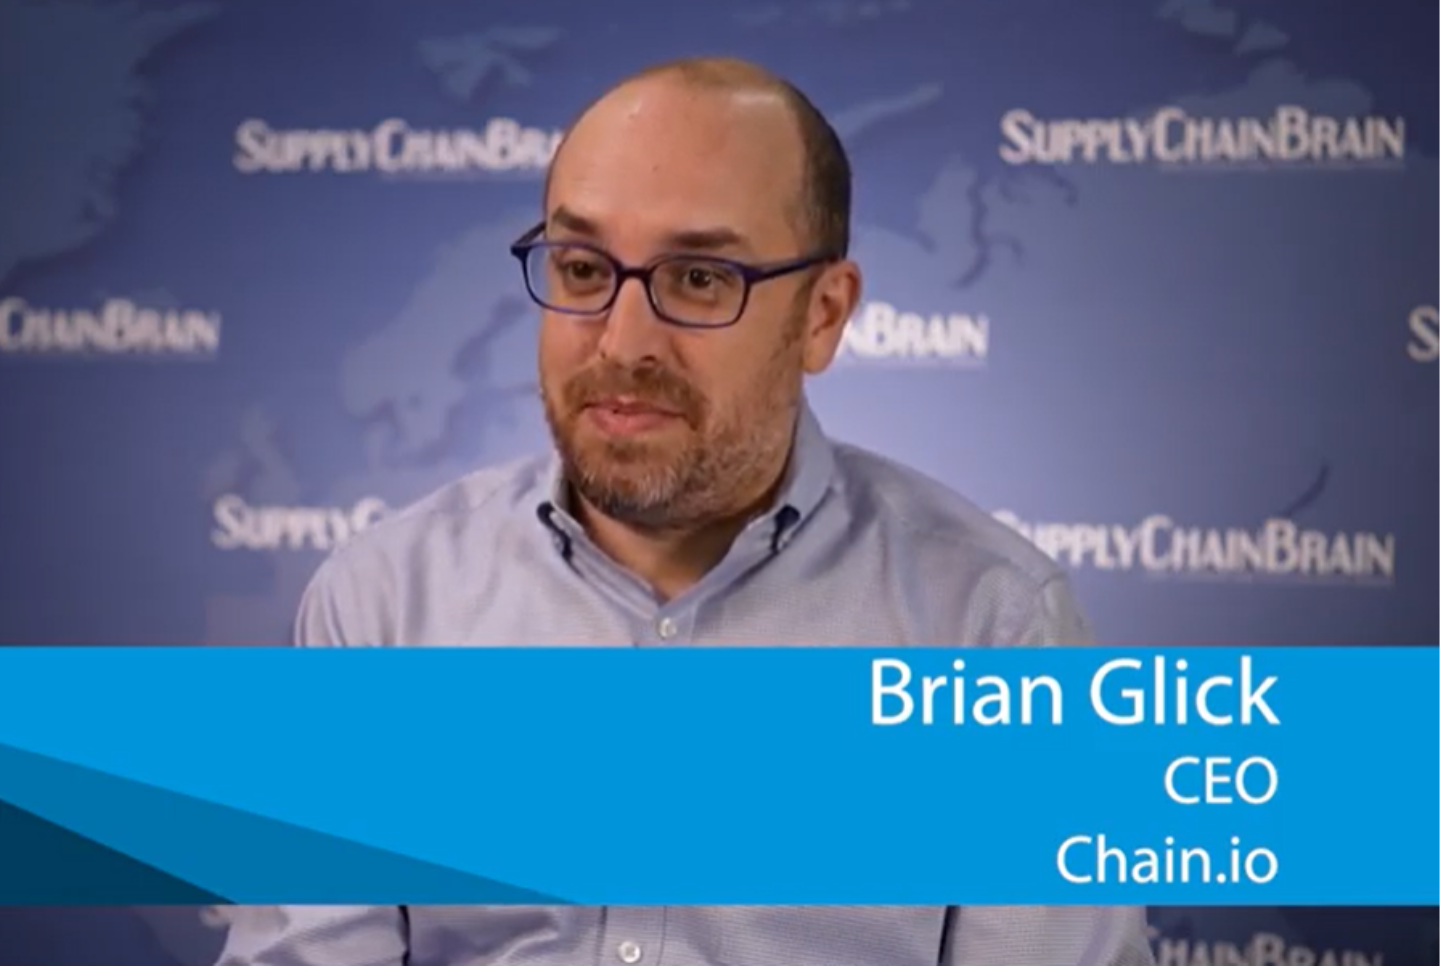 Brian Glick, chief executive officer of Chain.io, tells why global supply chains need to take a more complex and sophisticated approach to deciding where to source their products.